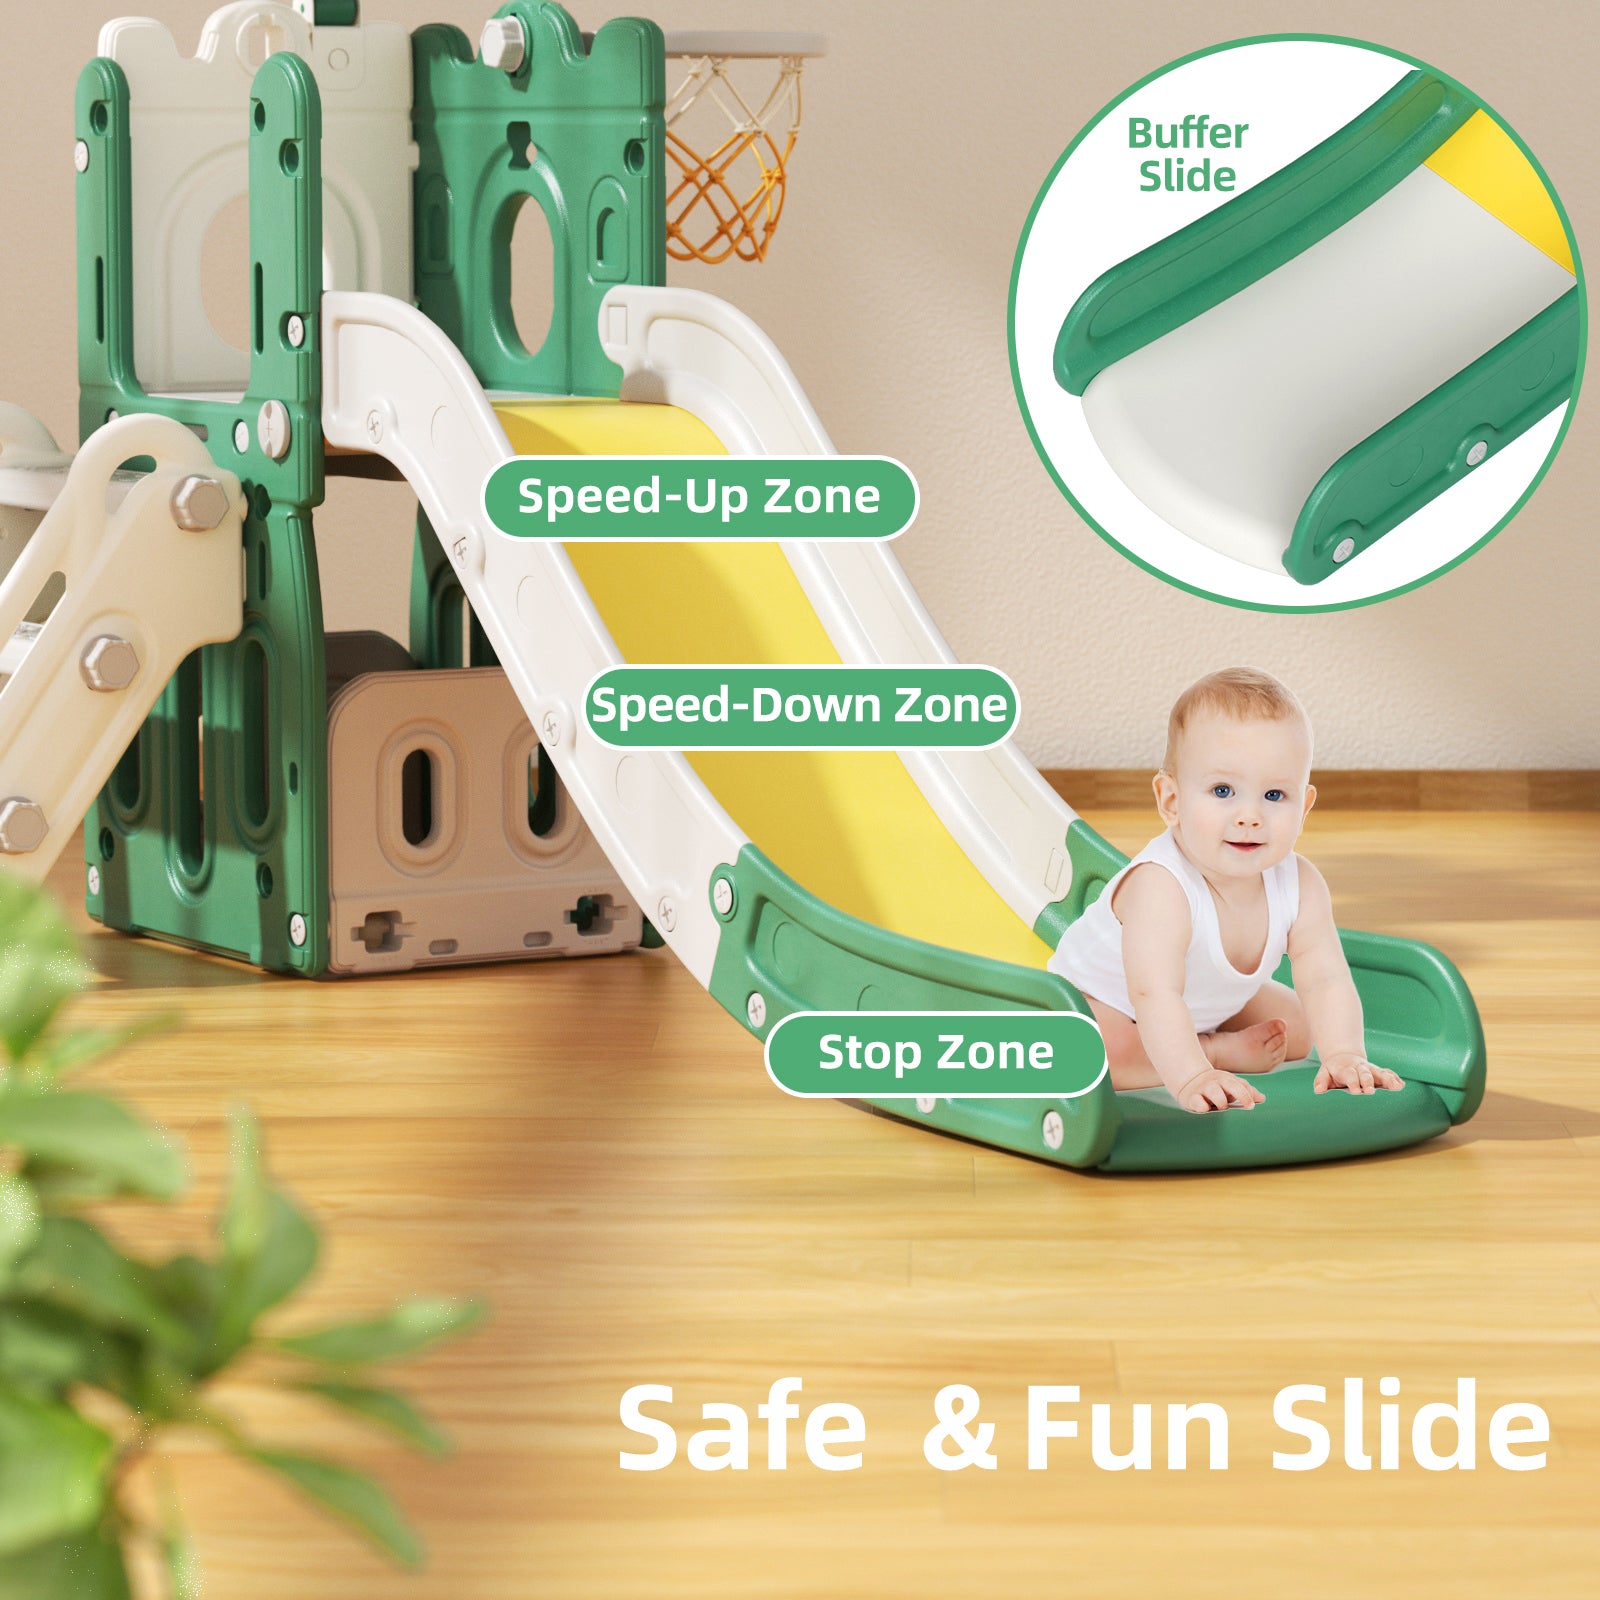 XJD 5-in-1 Toddler Slide Set in Yellow Green Freestanding Climber Playset for Ages 1-3, Outdoor/Indoor Playset with Basketball Hoop and Ball